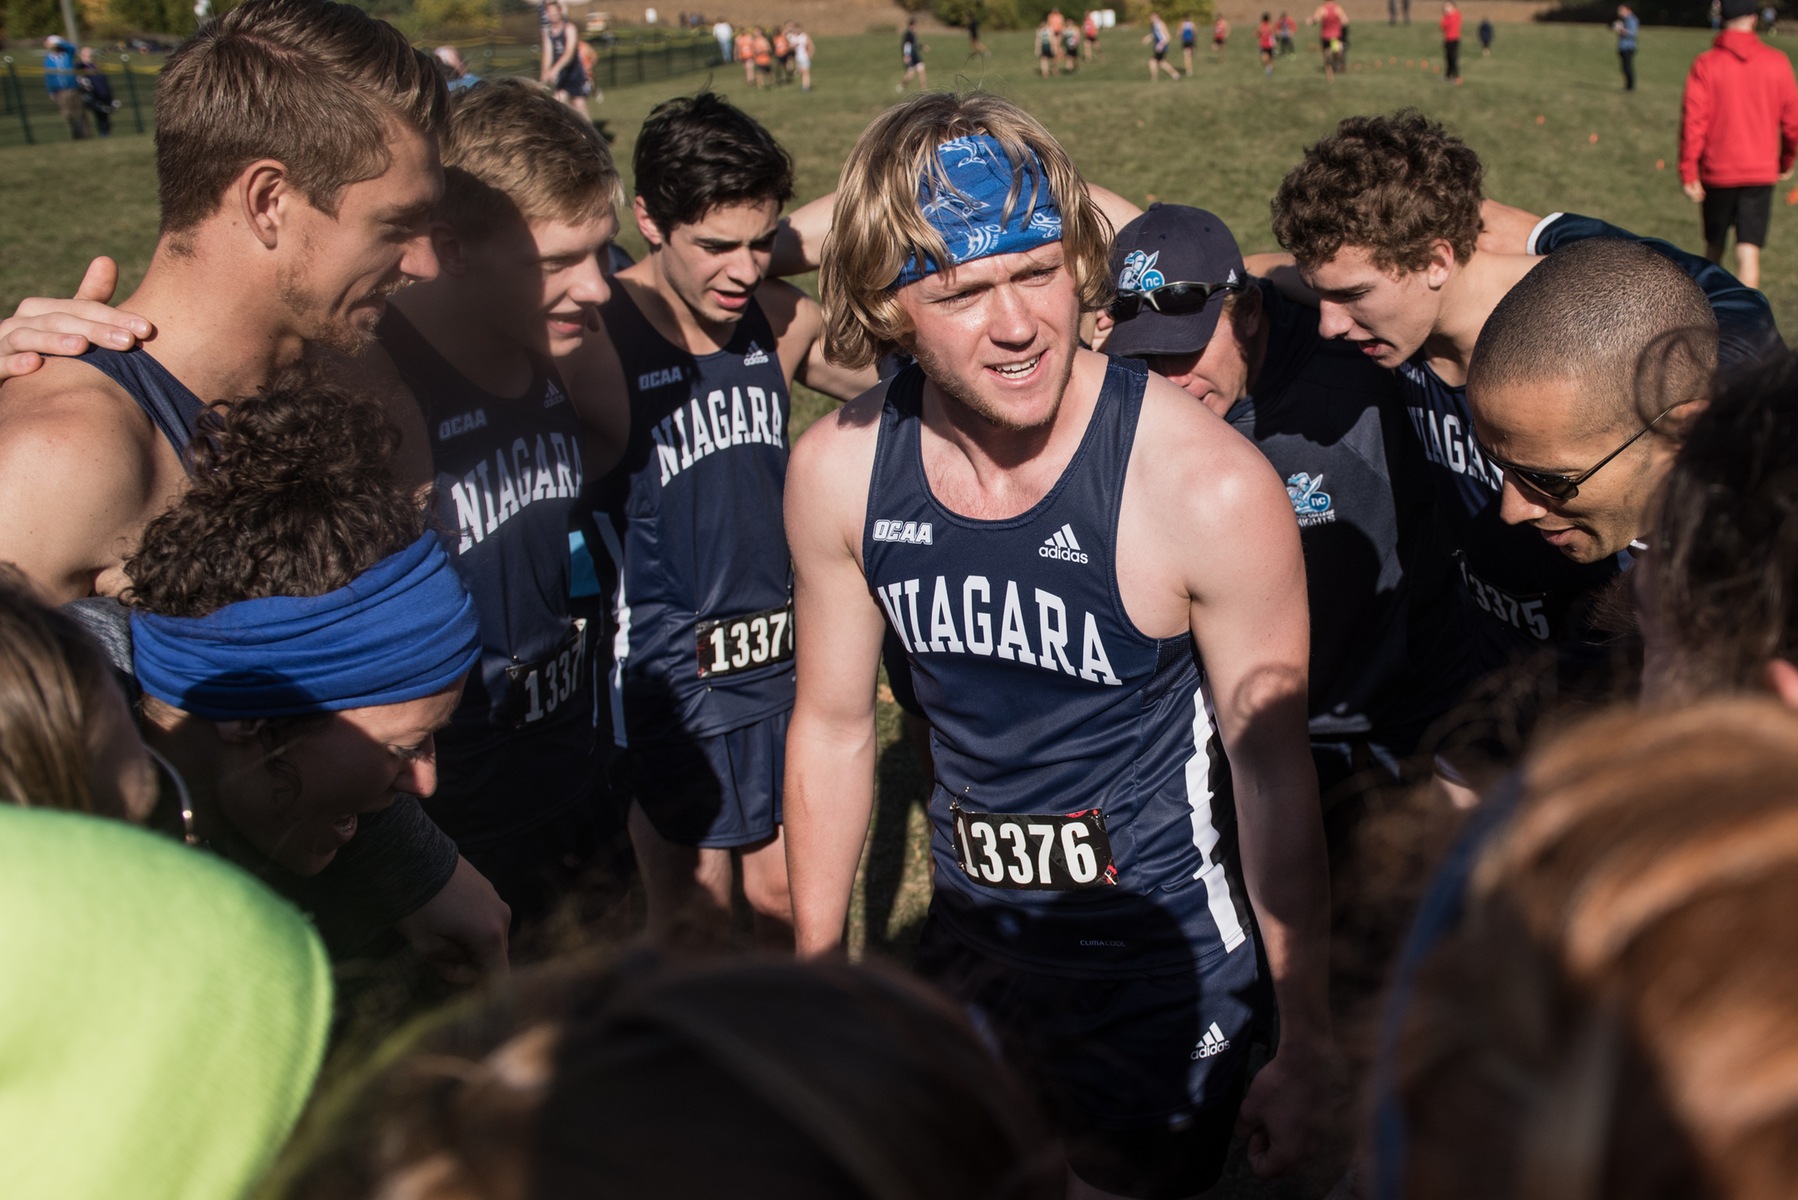 PREVIEW: Knights prepare for OCAA Championships in London